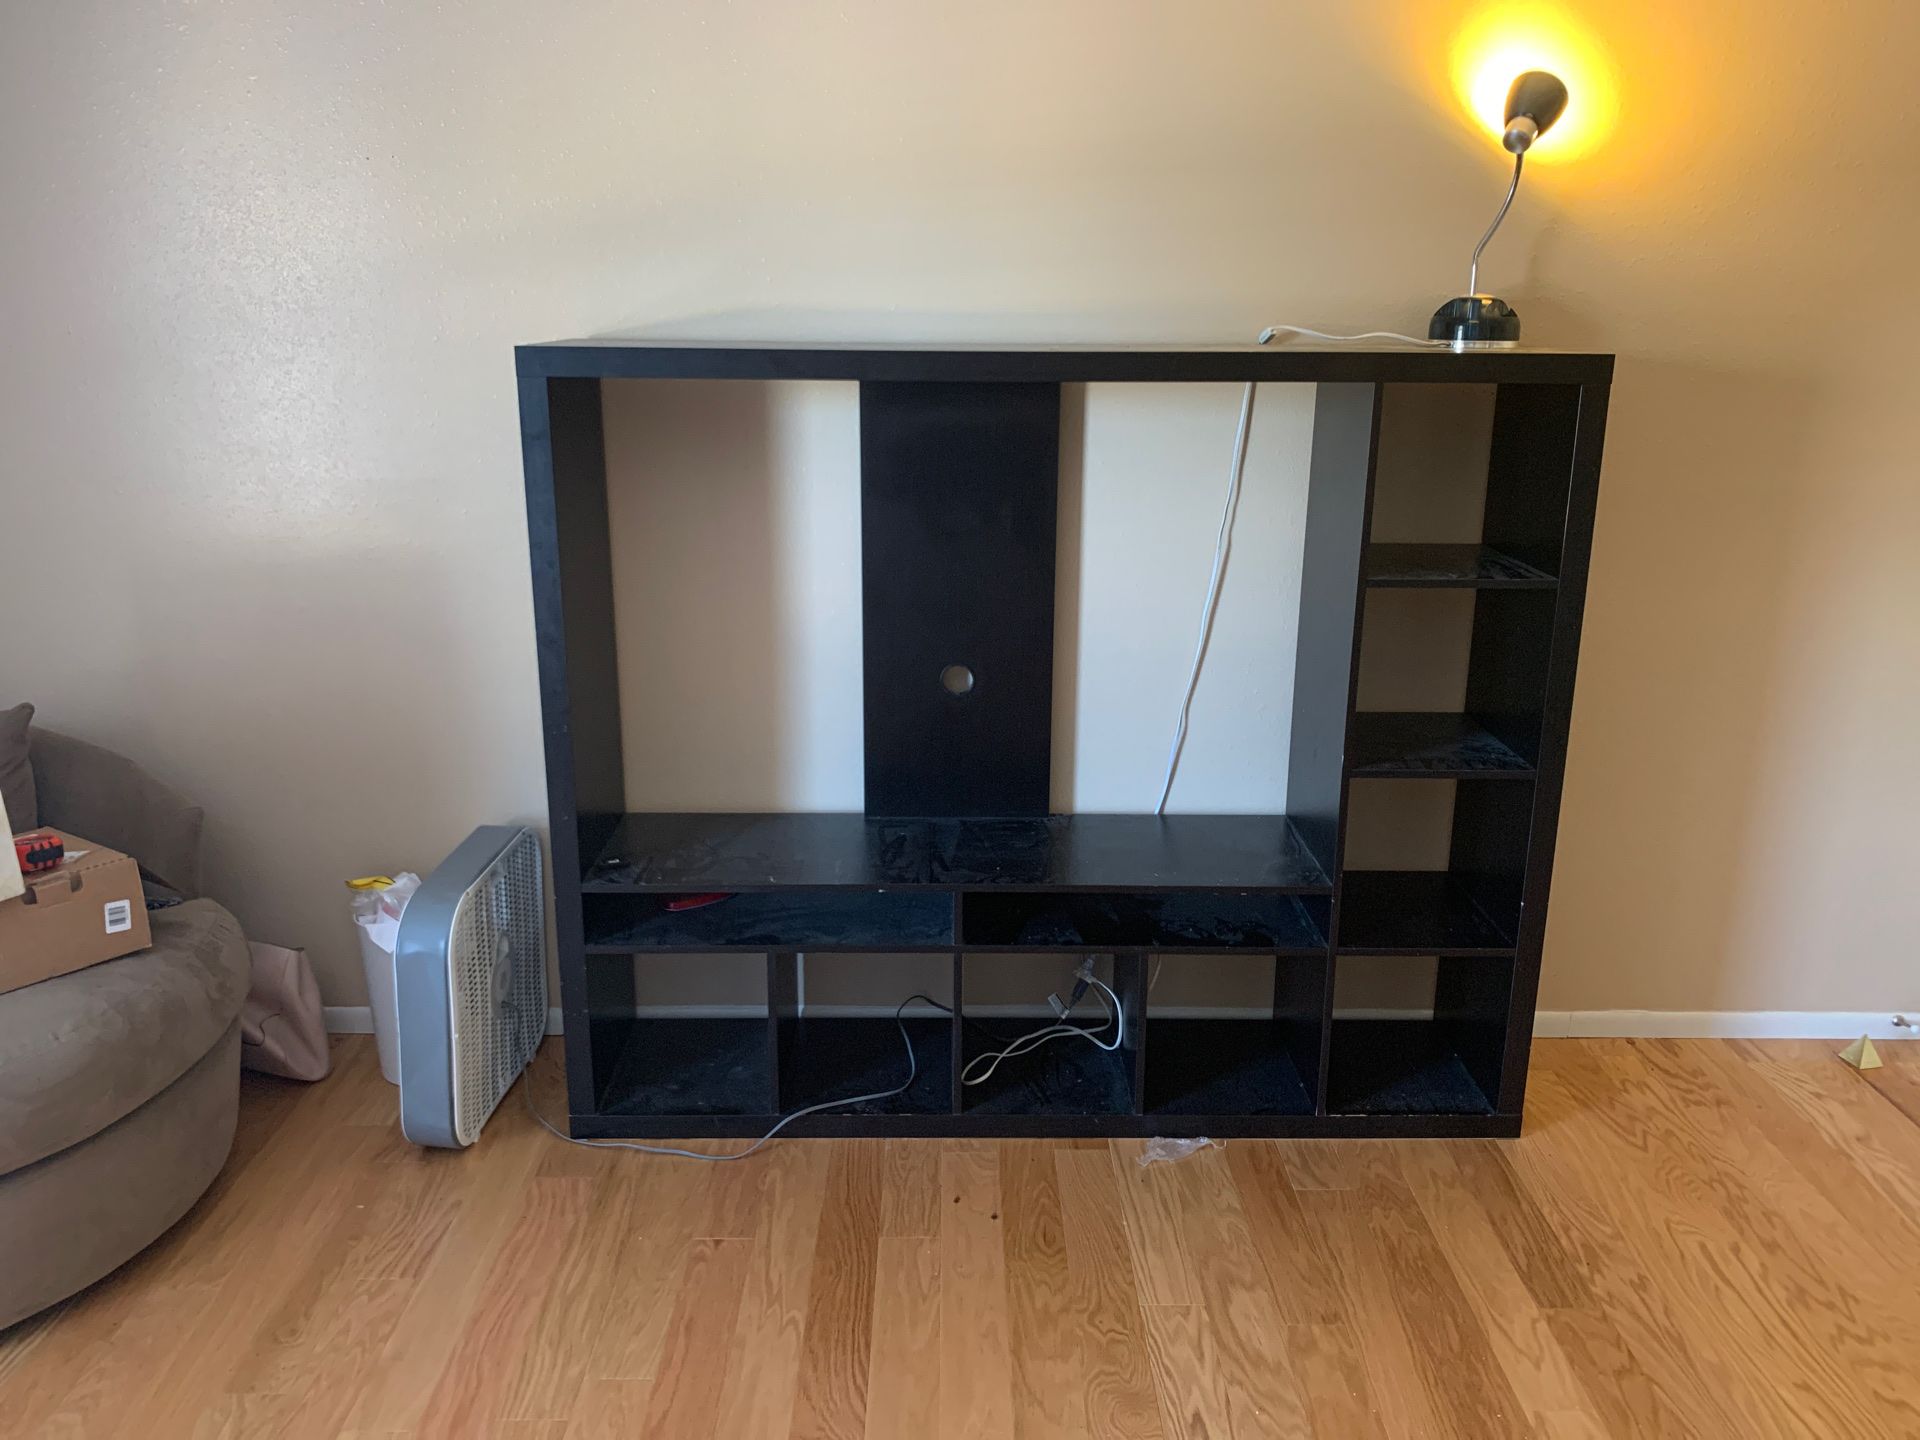 TV STAND IKEA(black) Great Condition